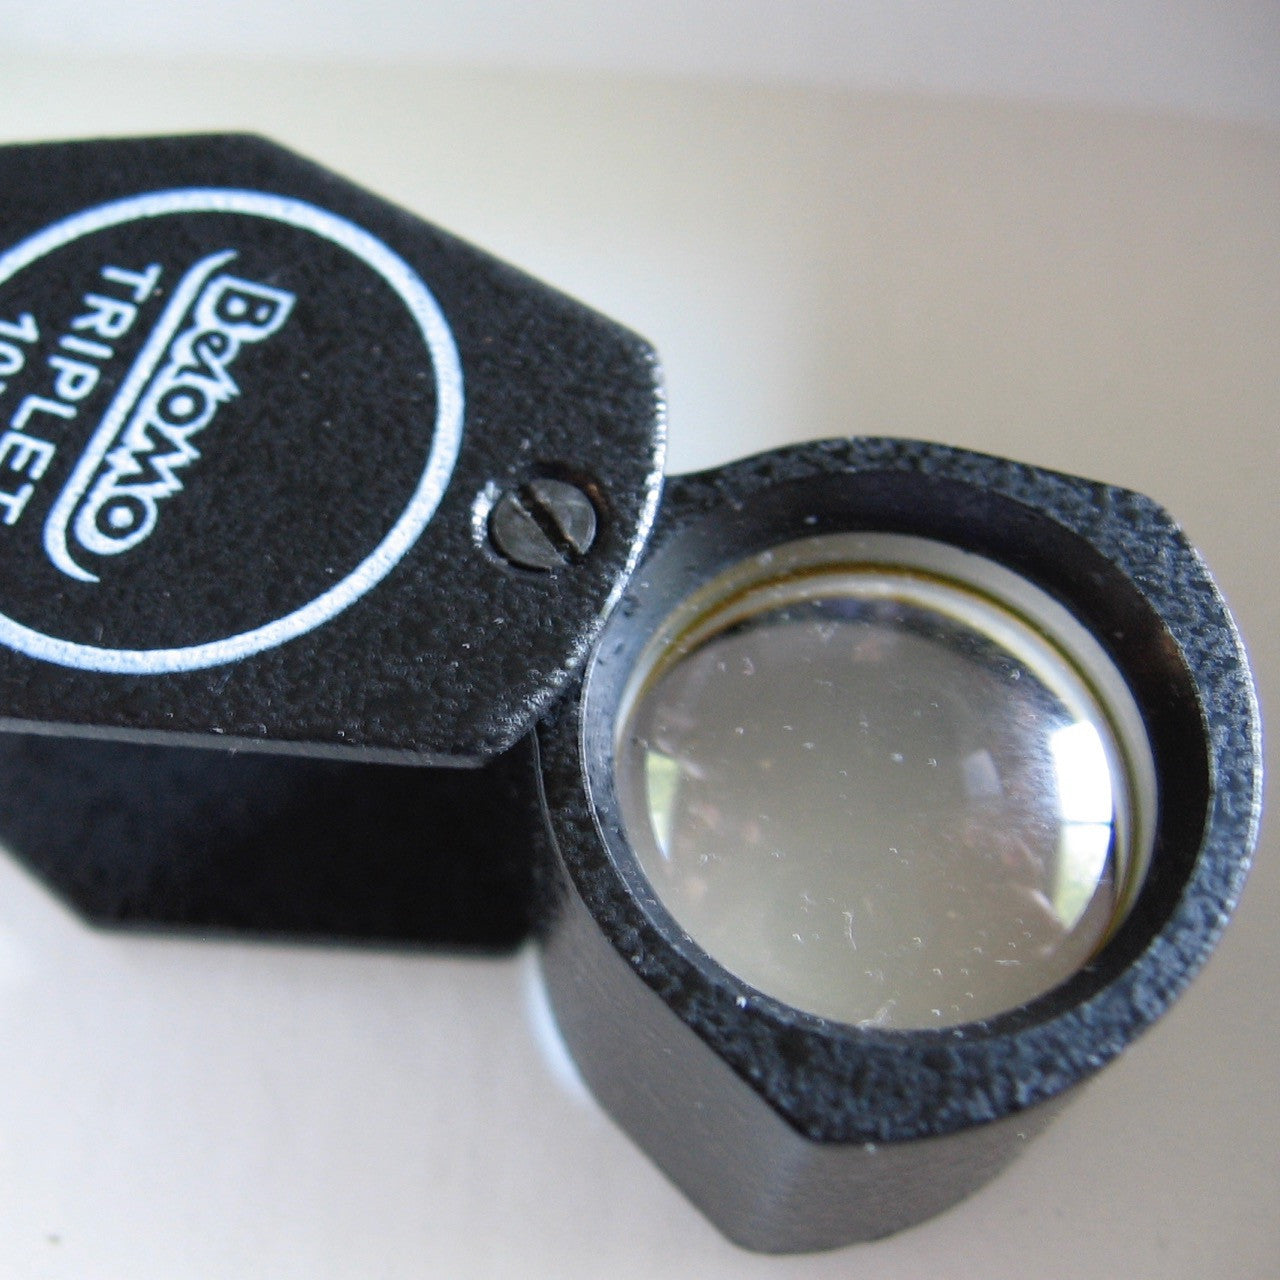 Belomo 10x 21mm Triplet Loupe – Song of Stones